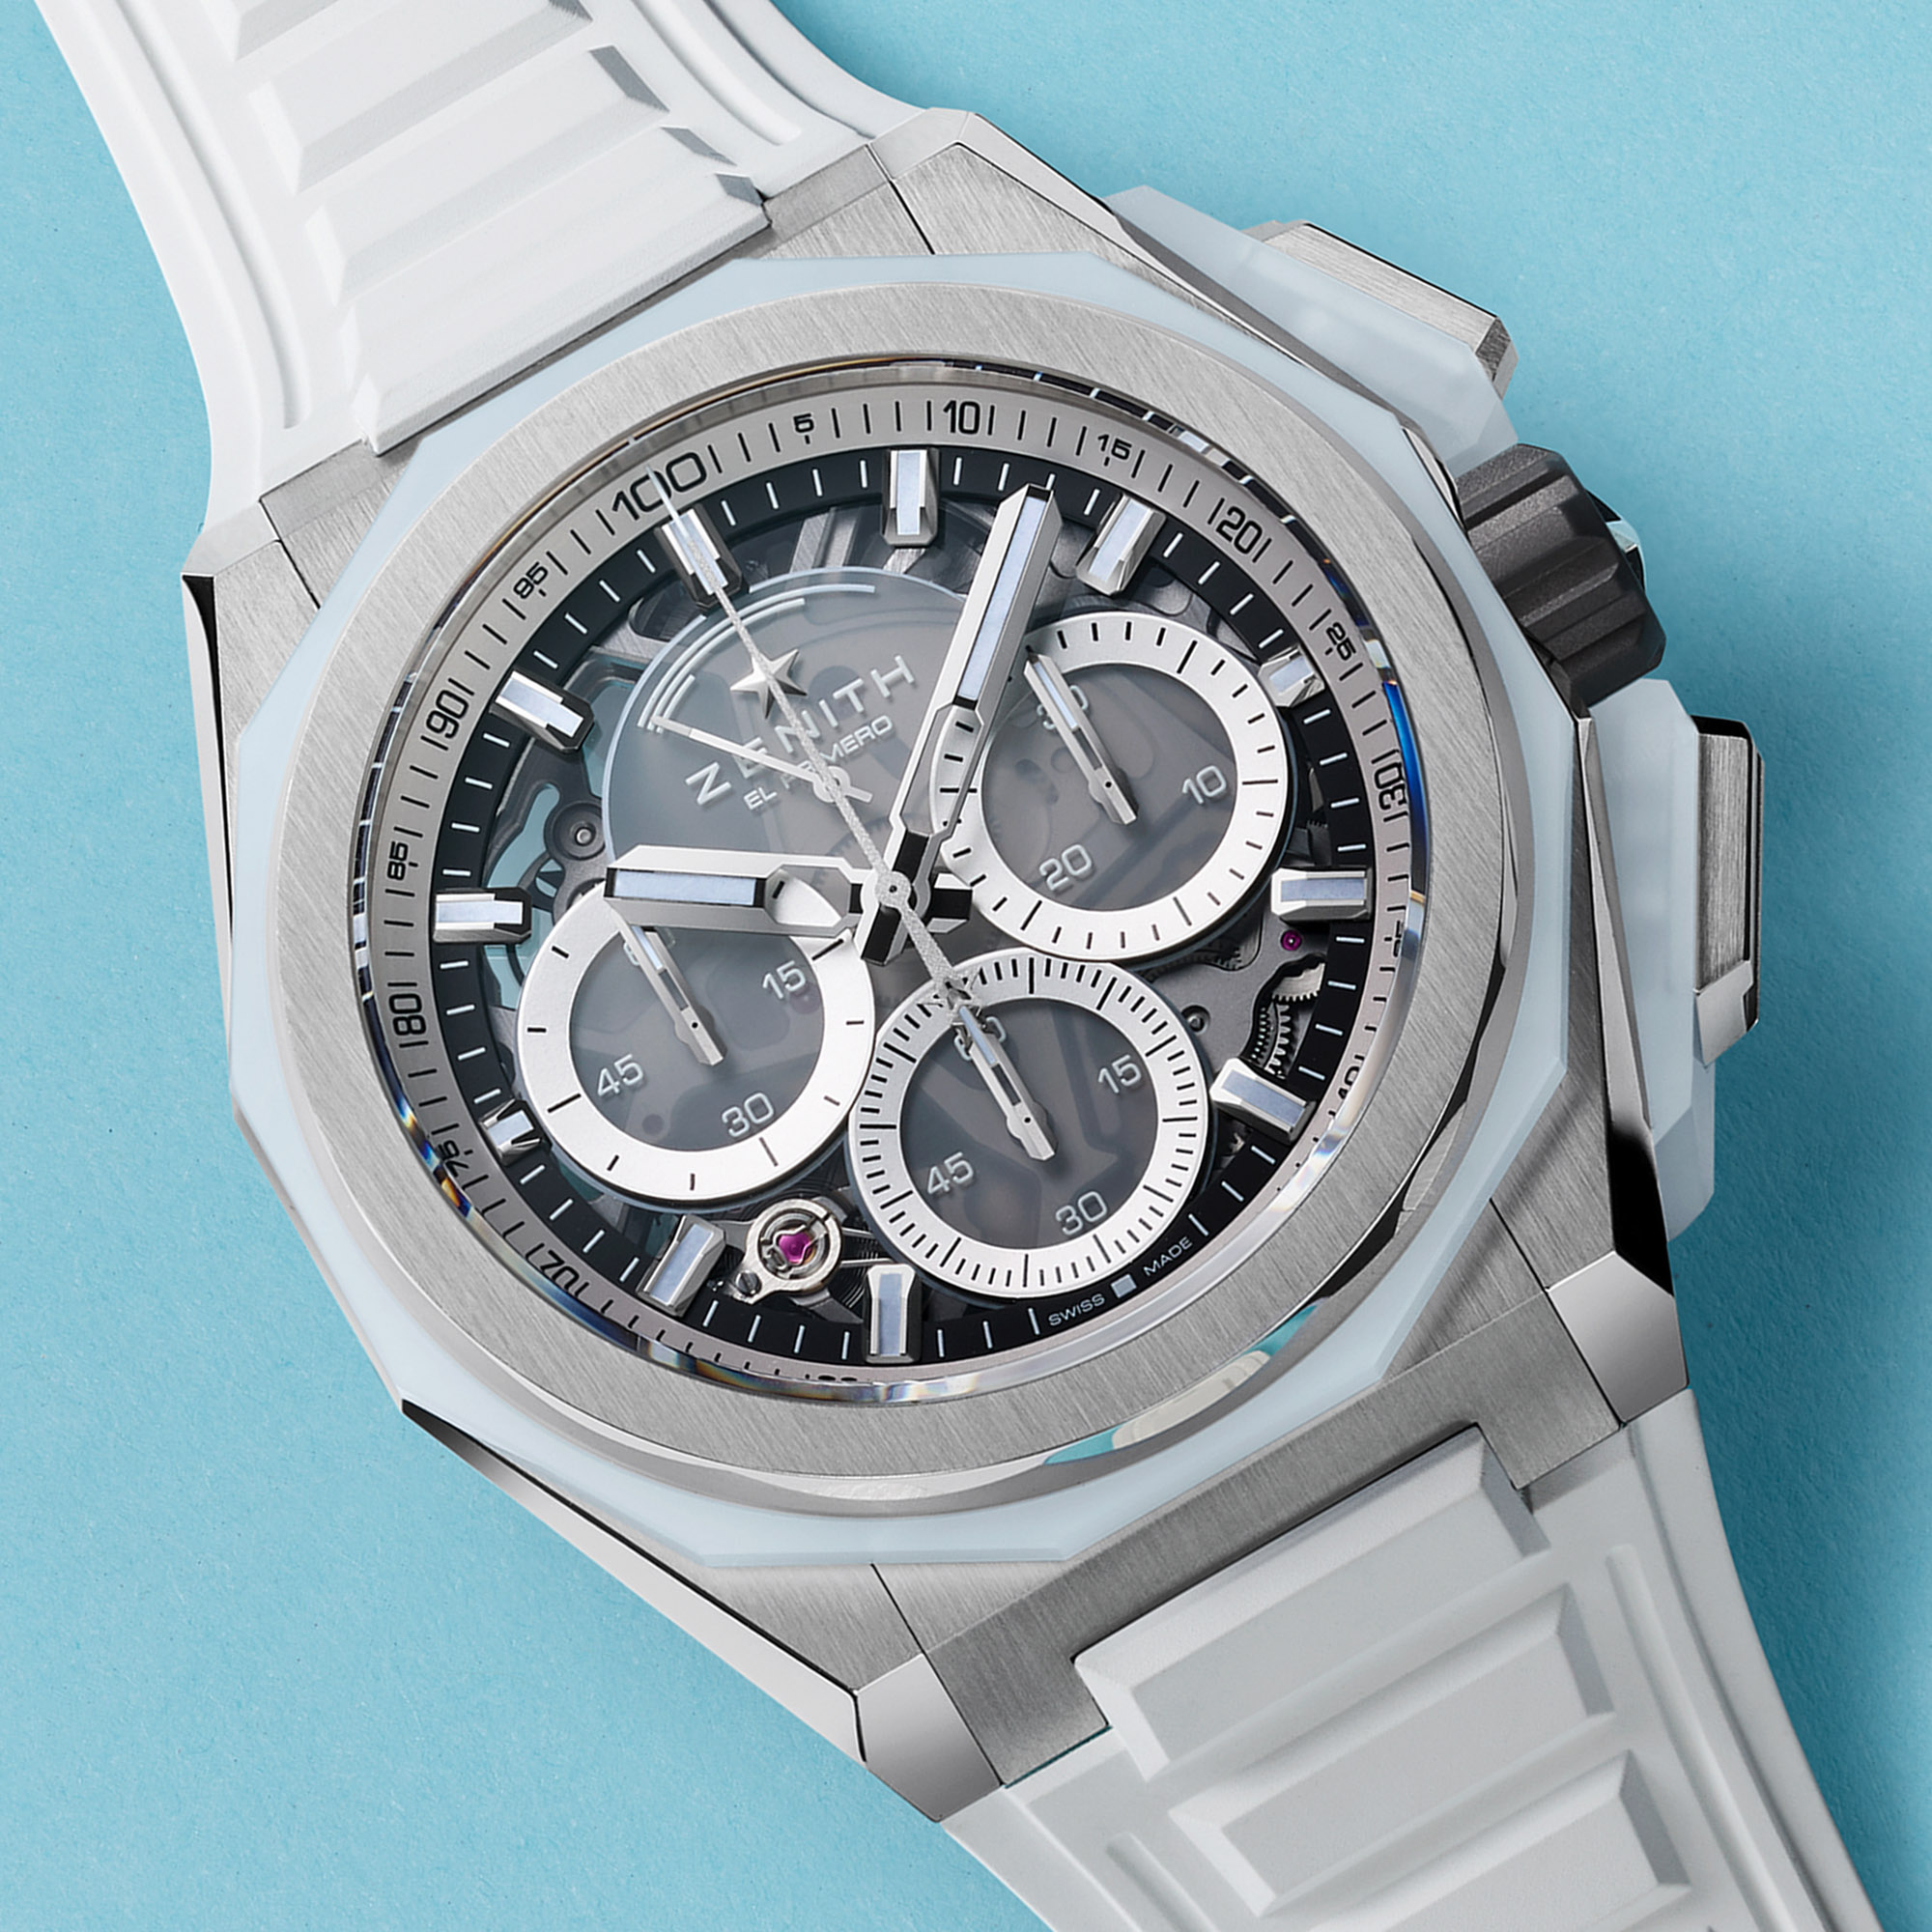 Zenith Launches a Trio of DEFY Skyline Boutique Edition with Ice Blue Dial